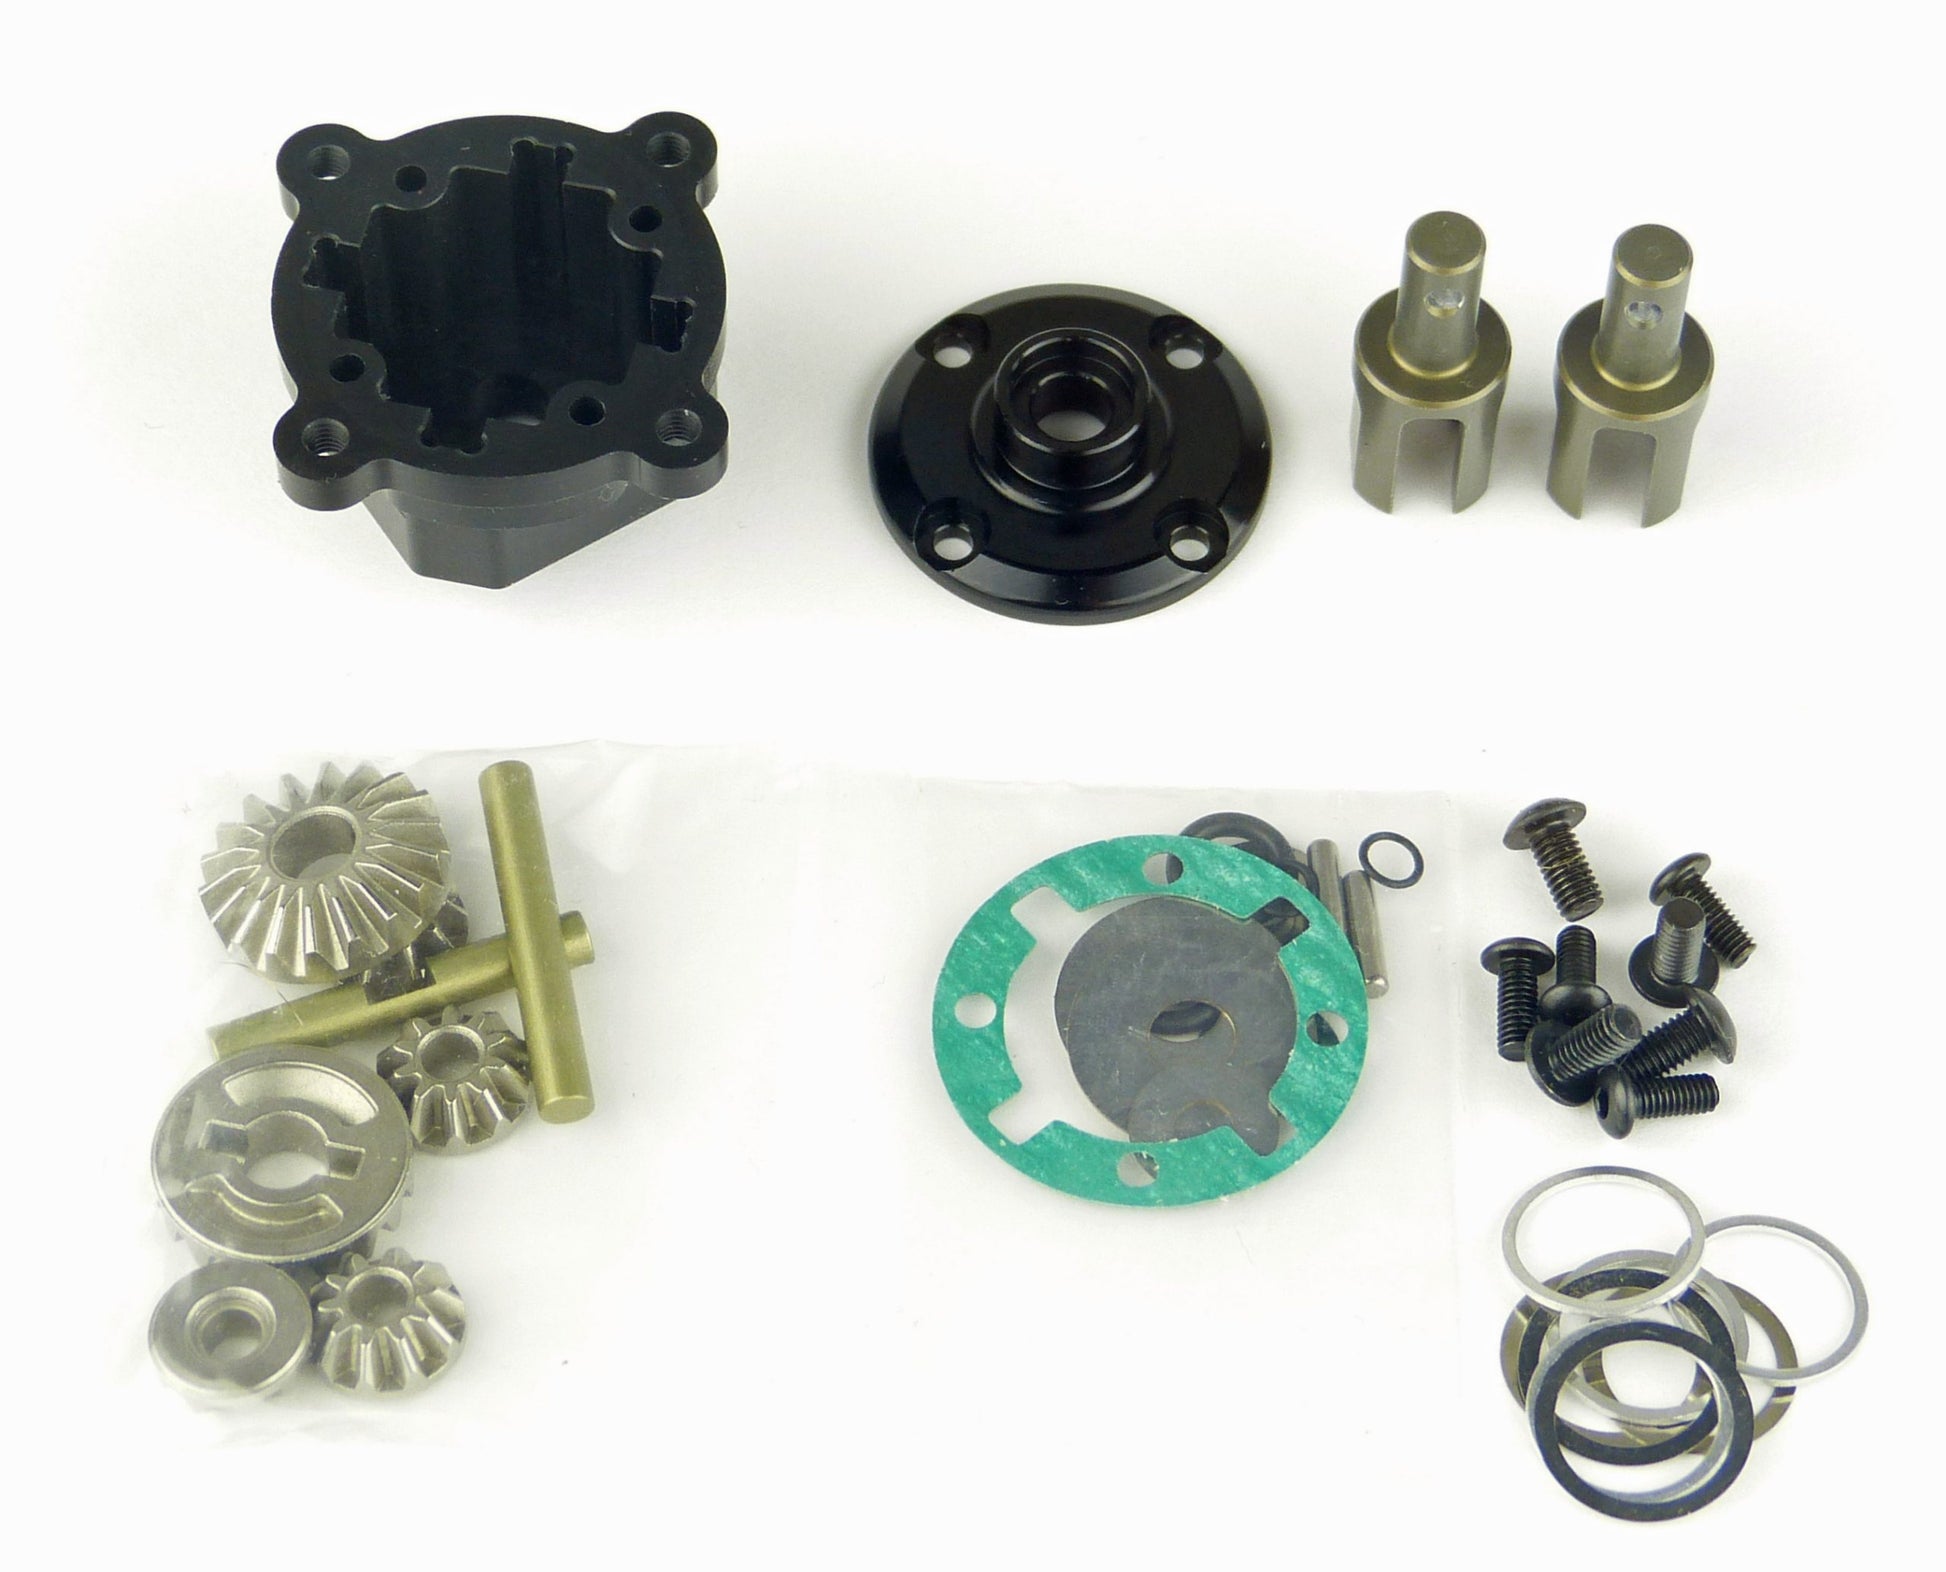 Gear Diff for V2 Direct Drive CW-4157